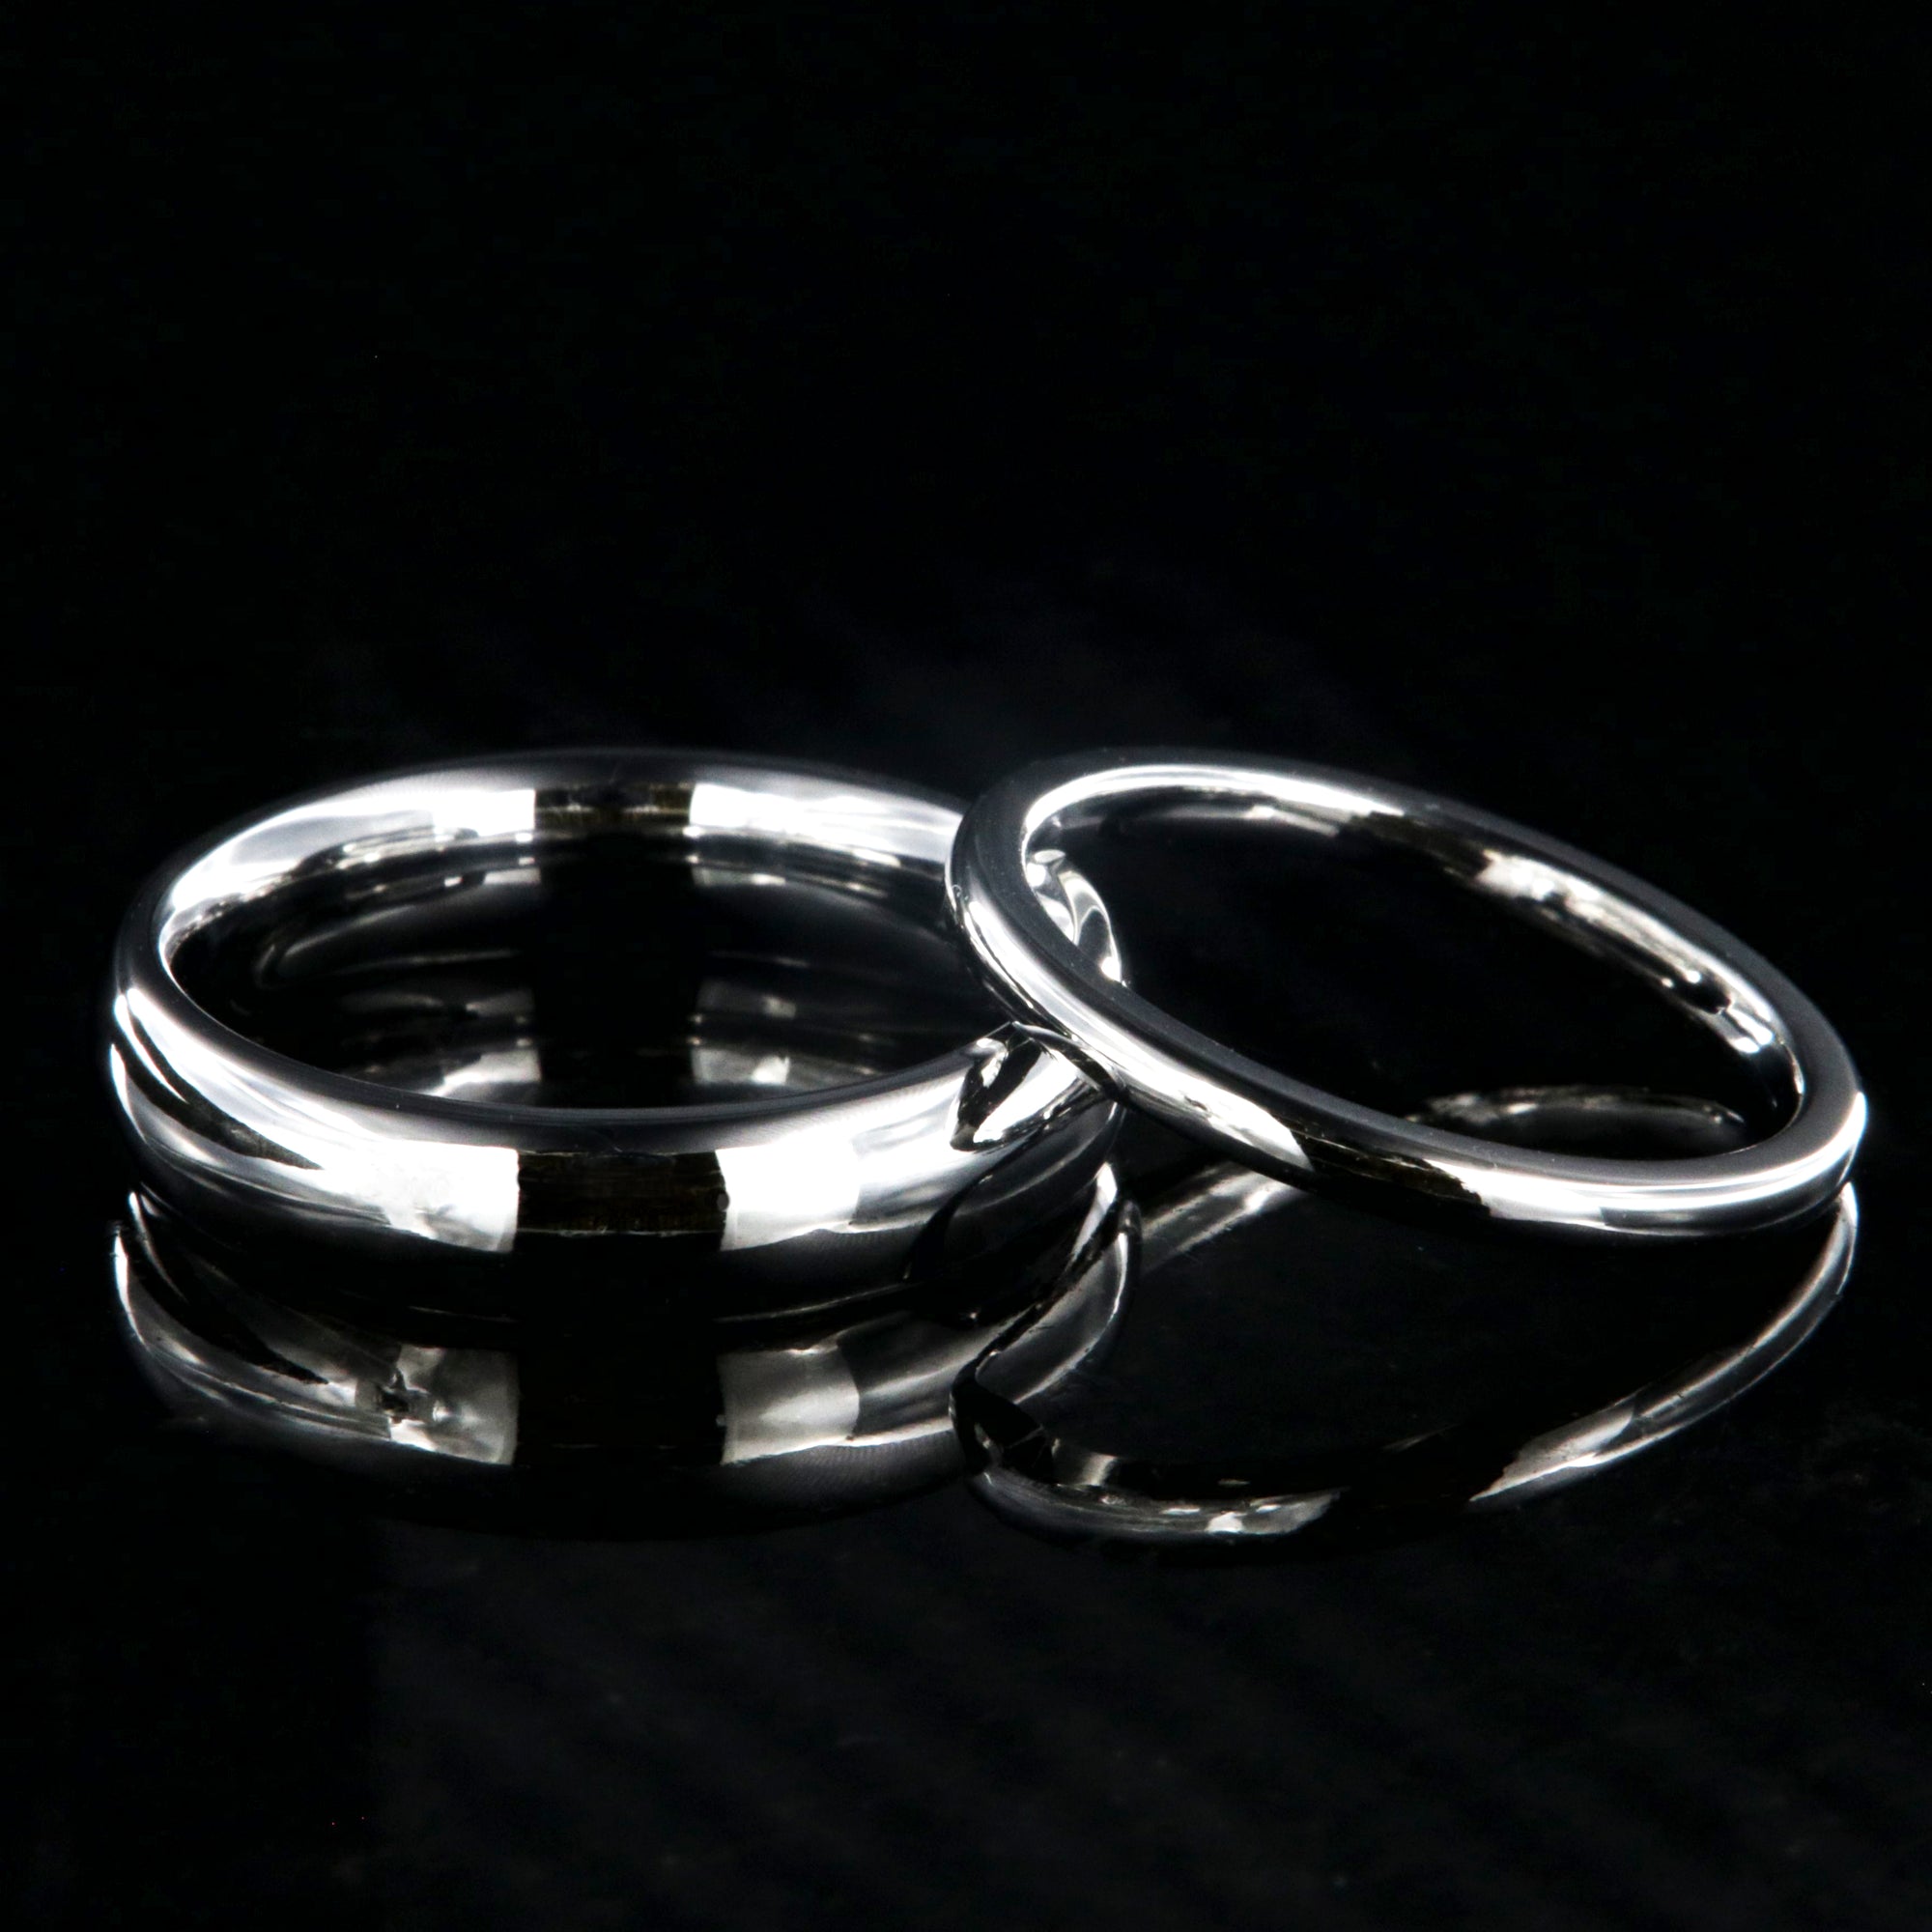 5mm and 2mm wide matching cobalt wedding bands with a polish finish and rounded profile